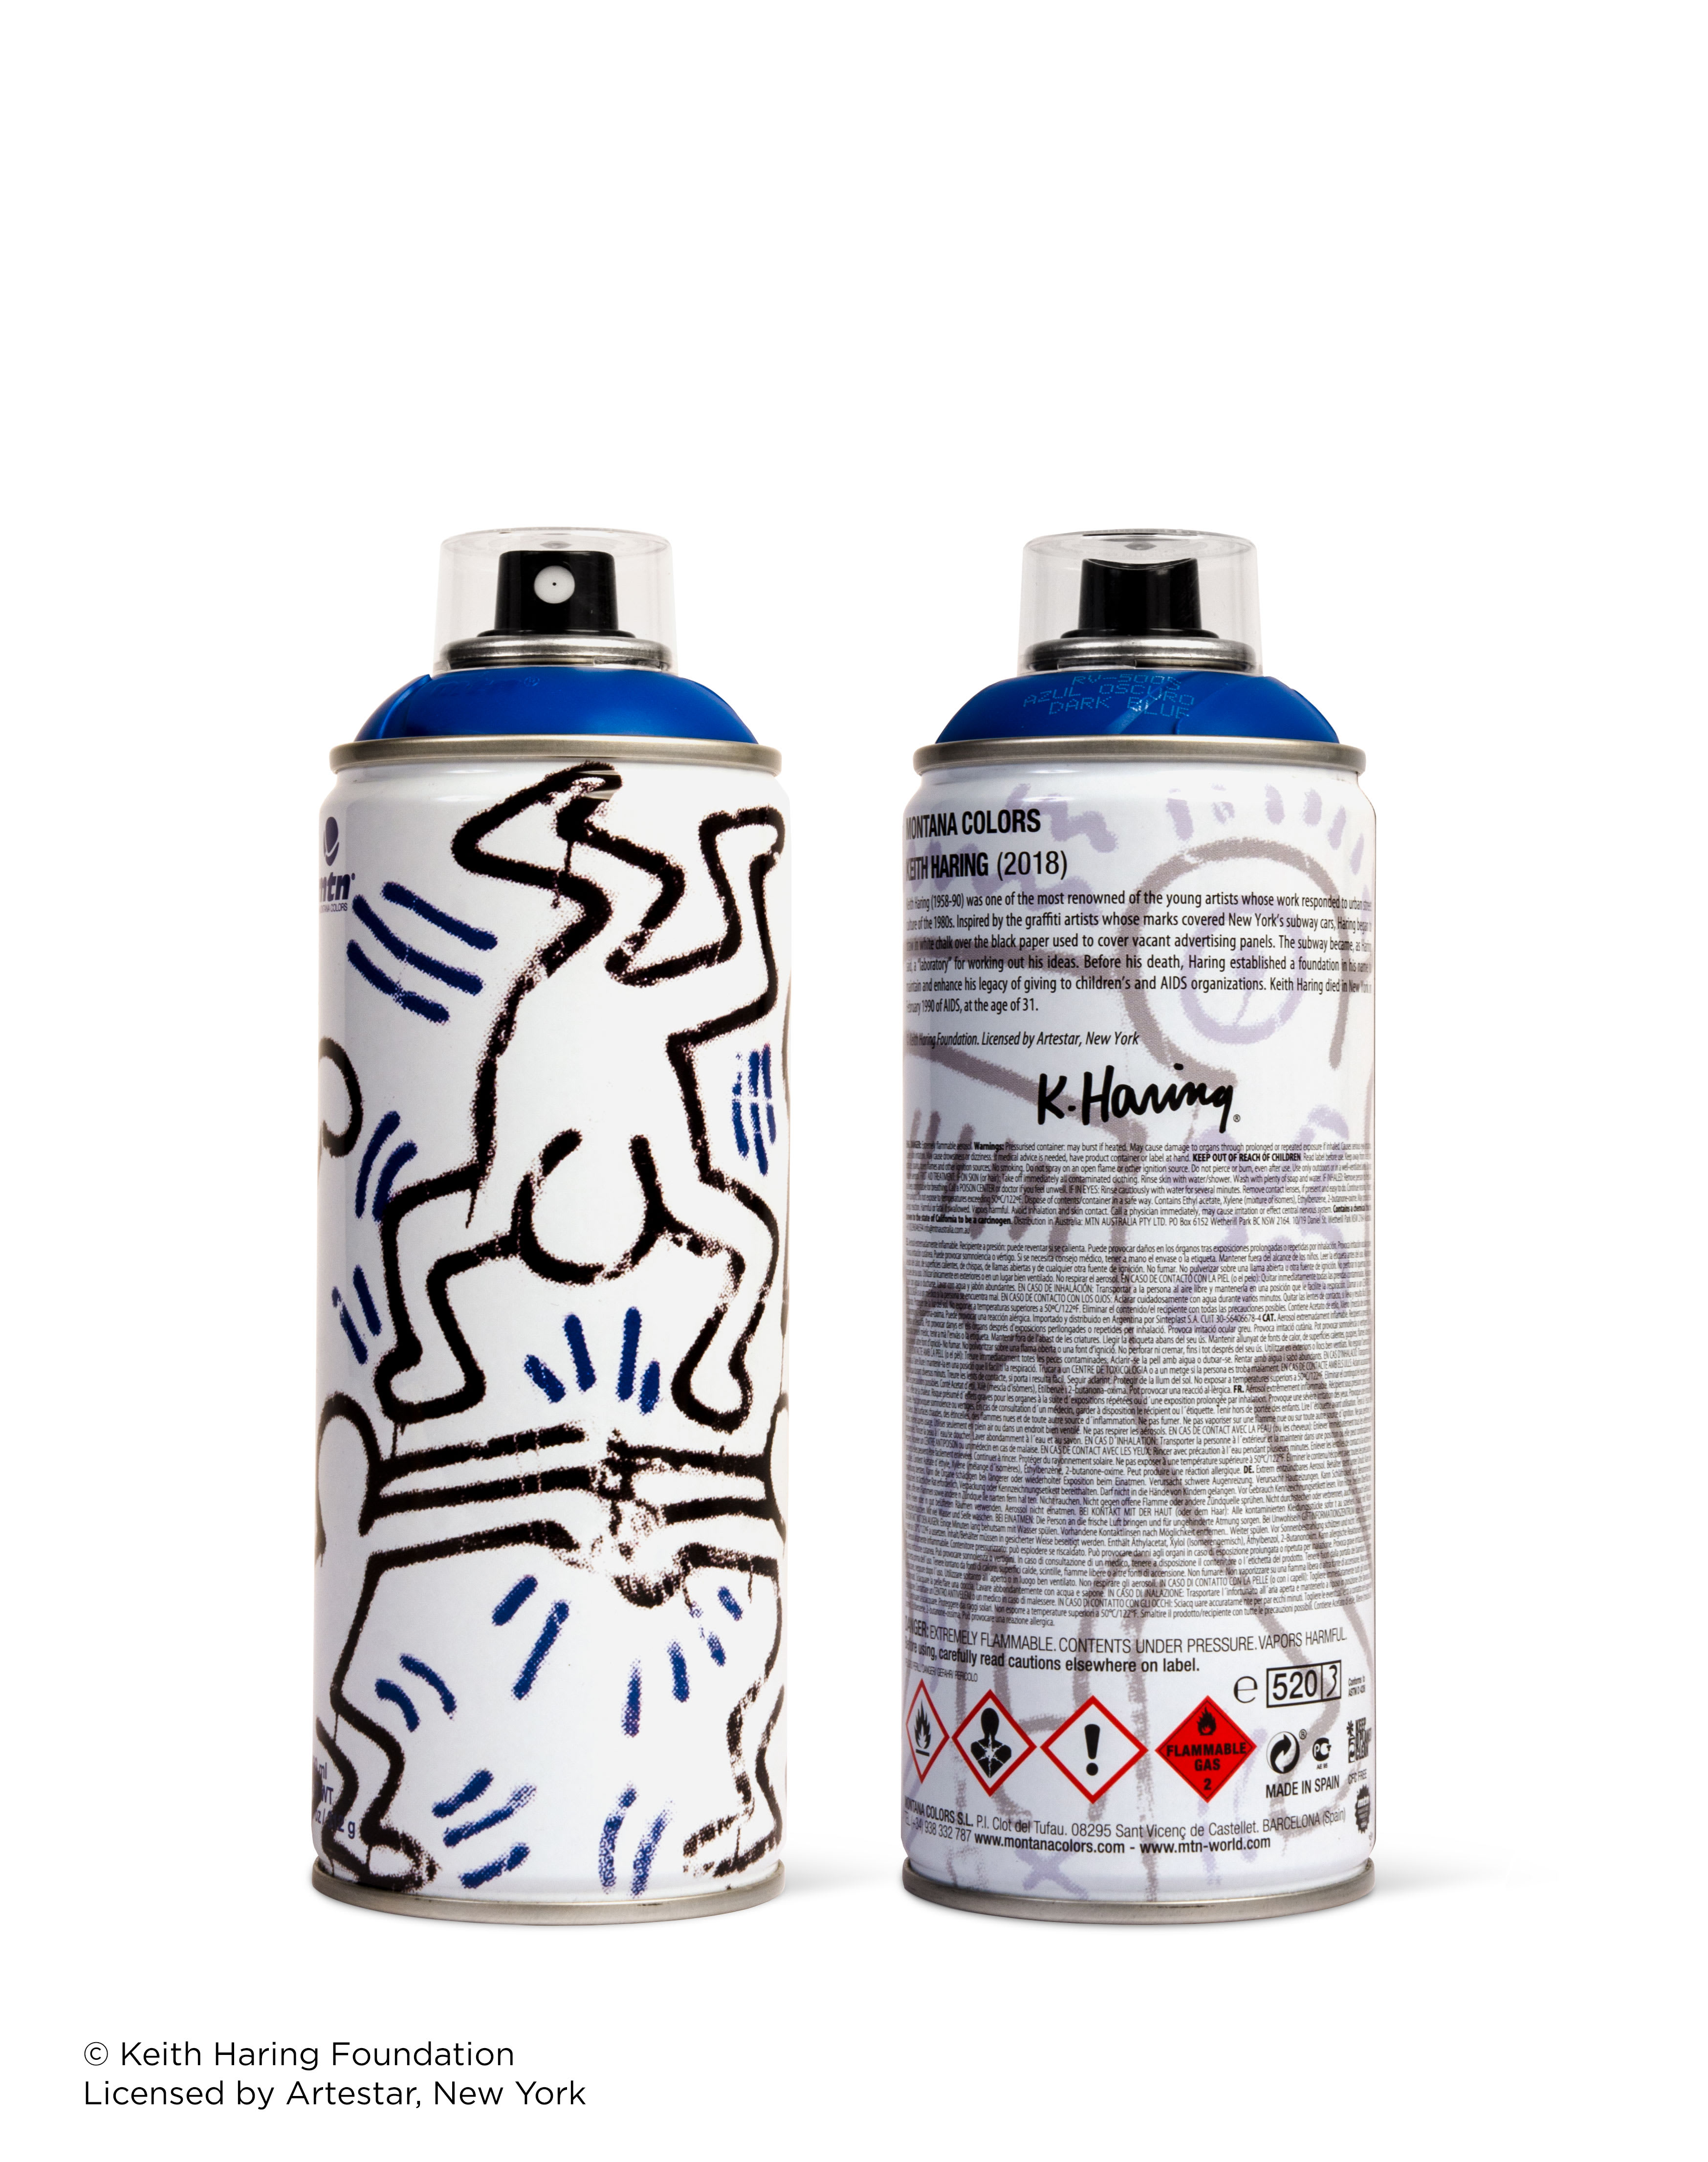 Blue Keith Haring spray paint can for Beyond The Streets.